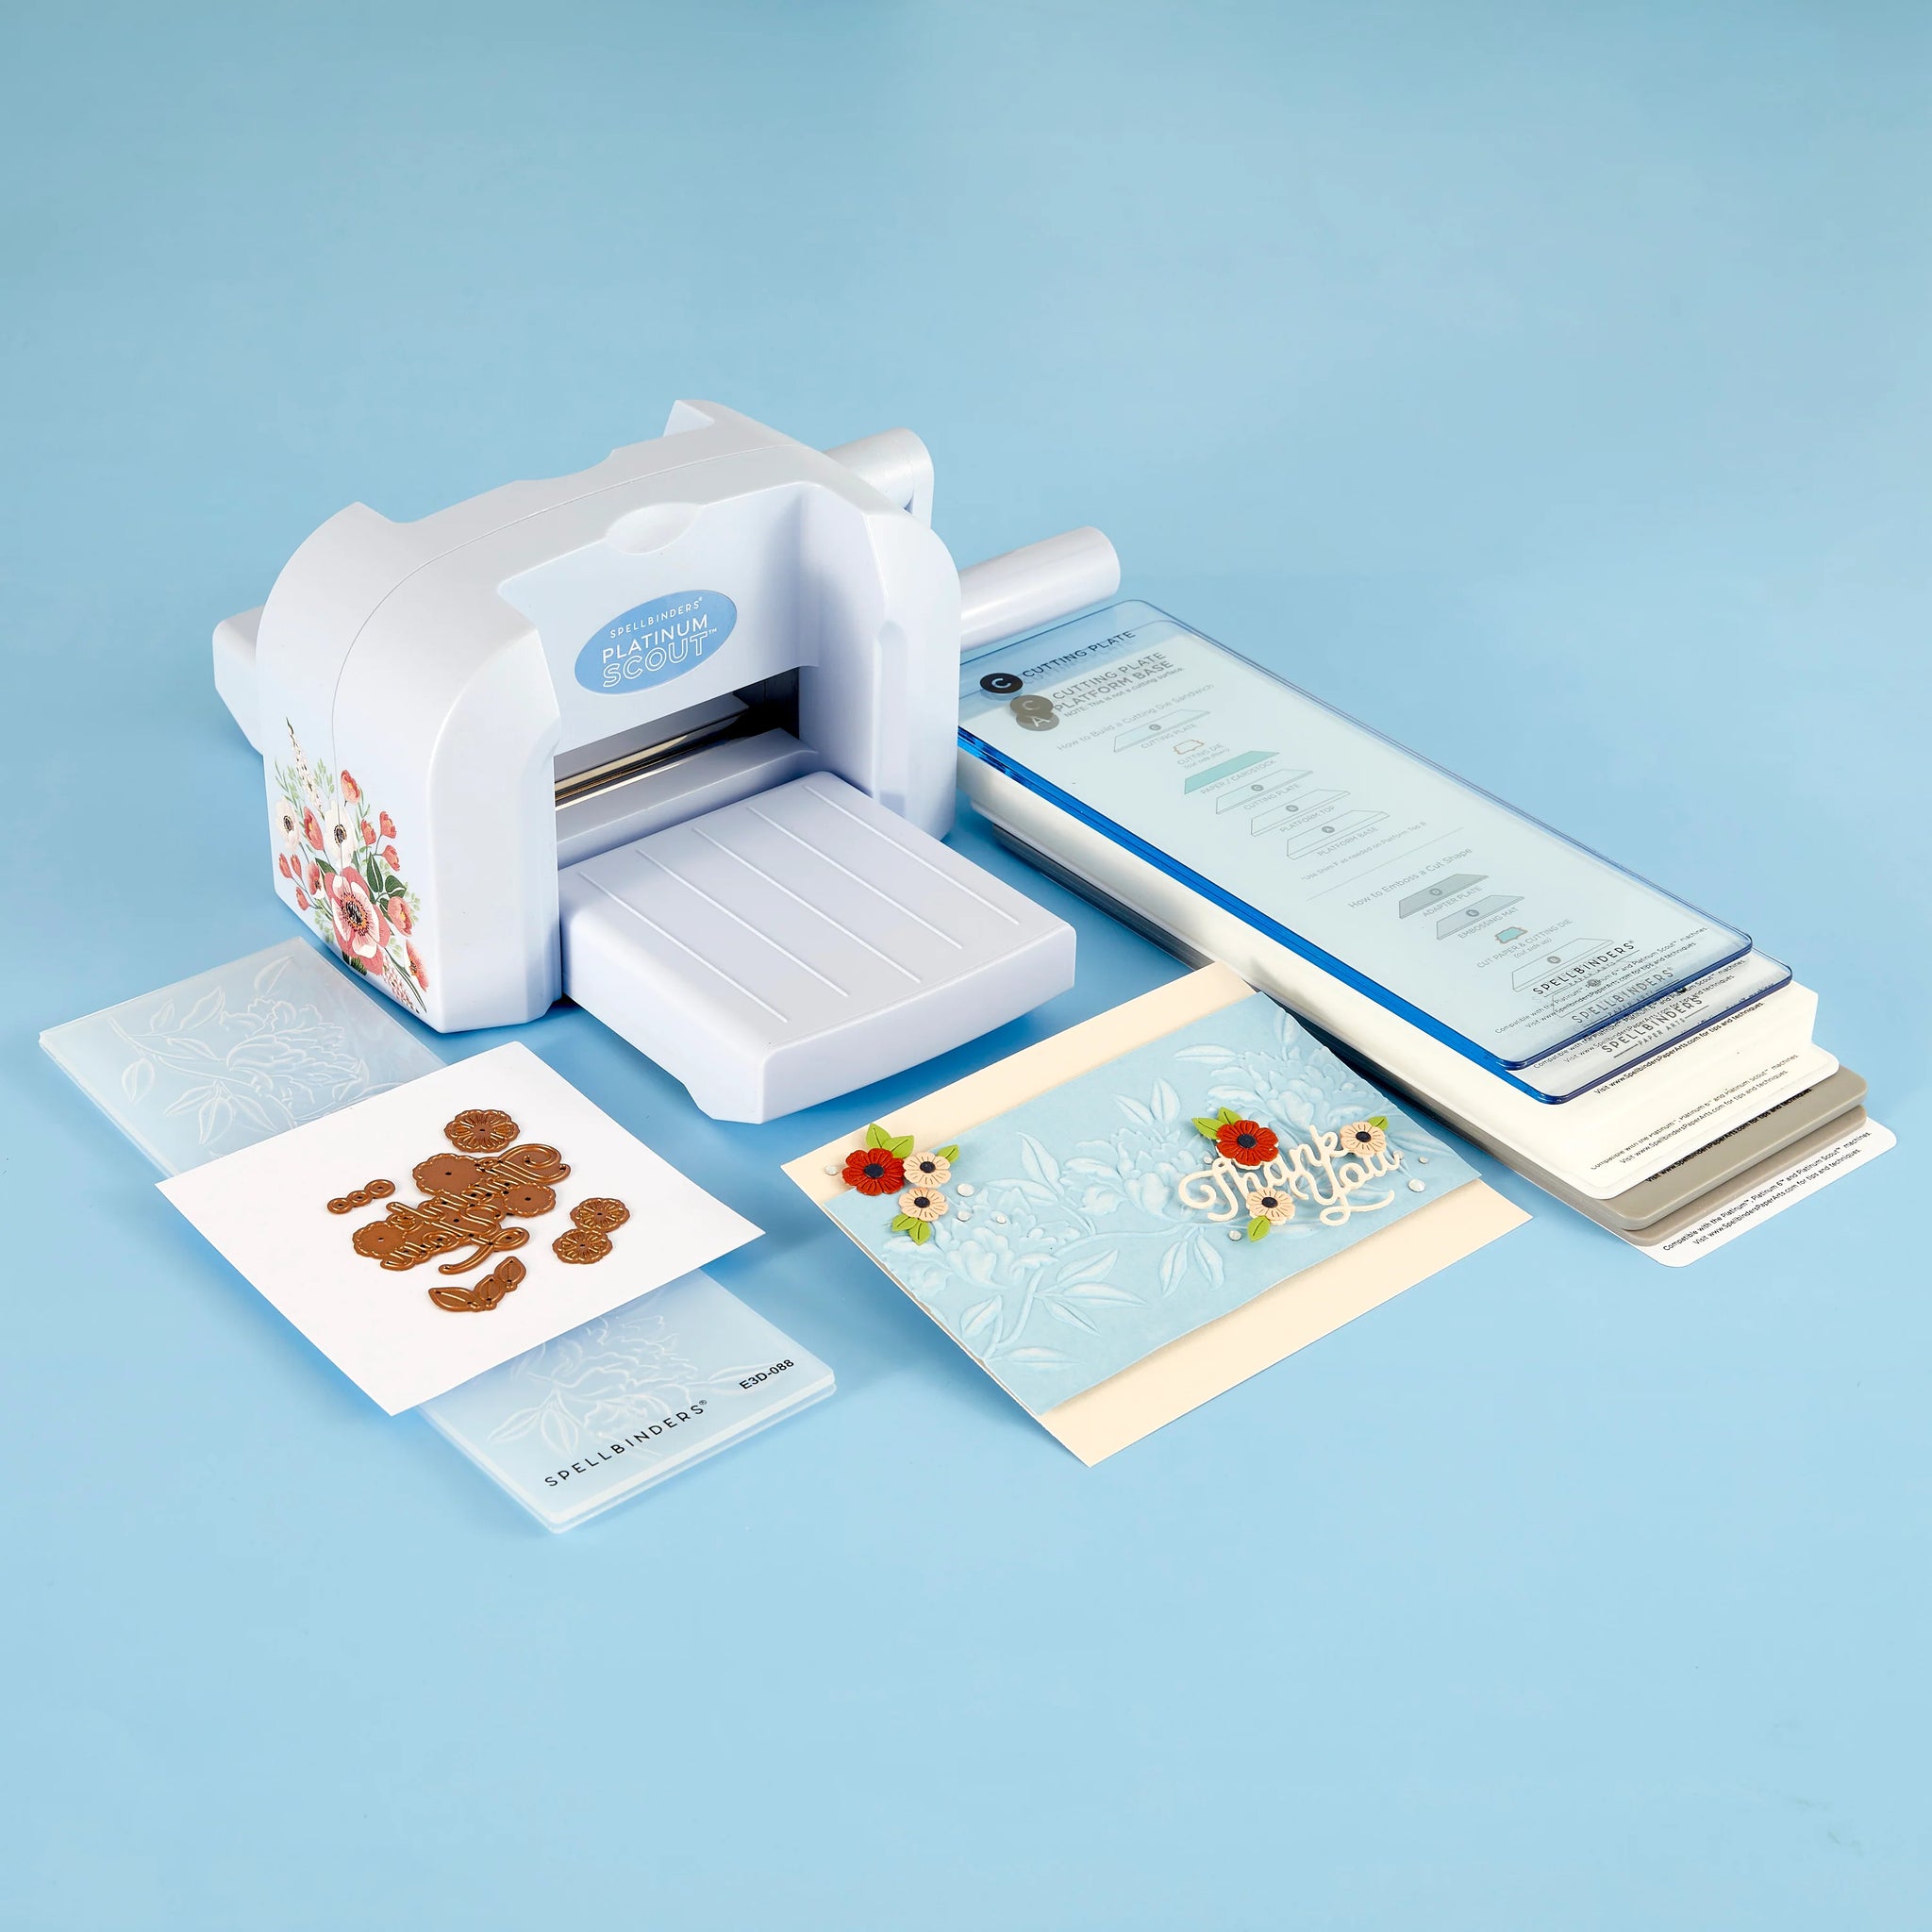 Blue Mist Scout Compact Die Cutting and Embossing Machine - Independent Retailer Exclusive